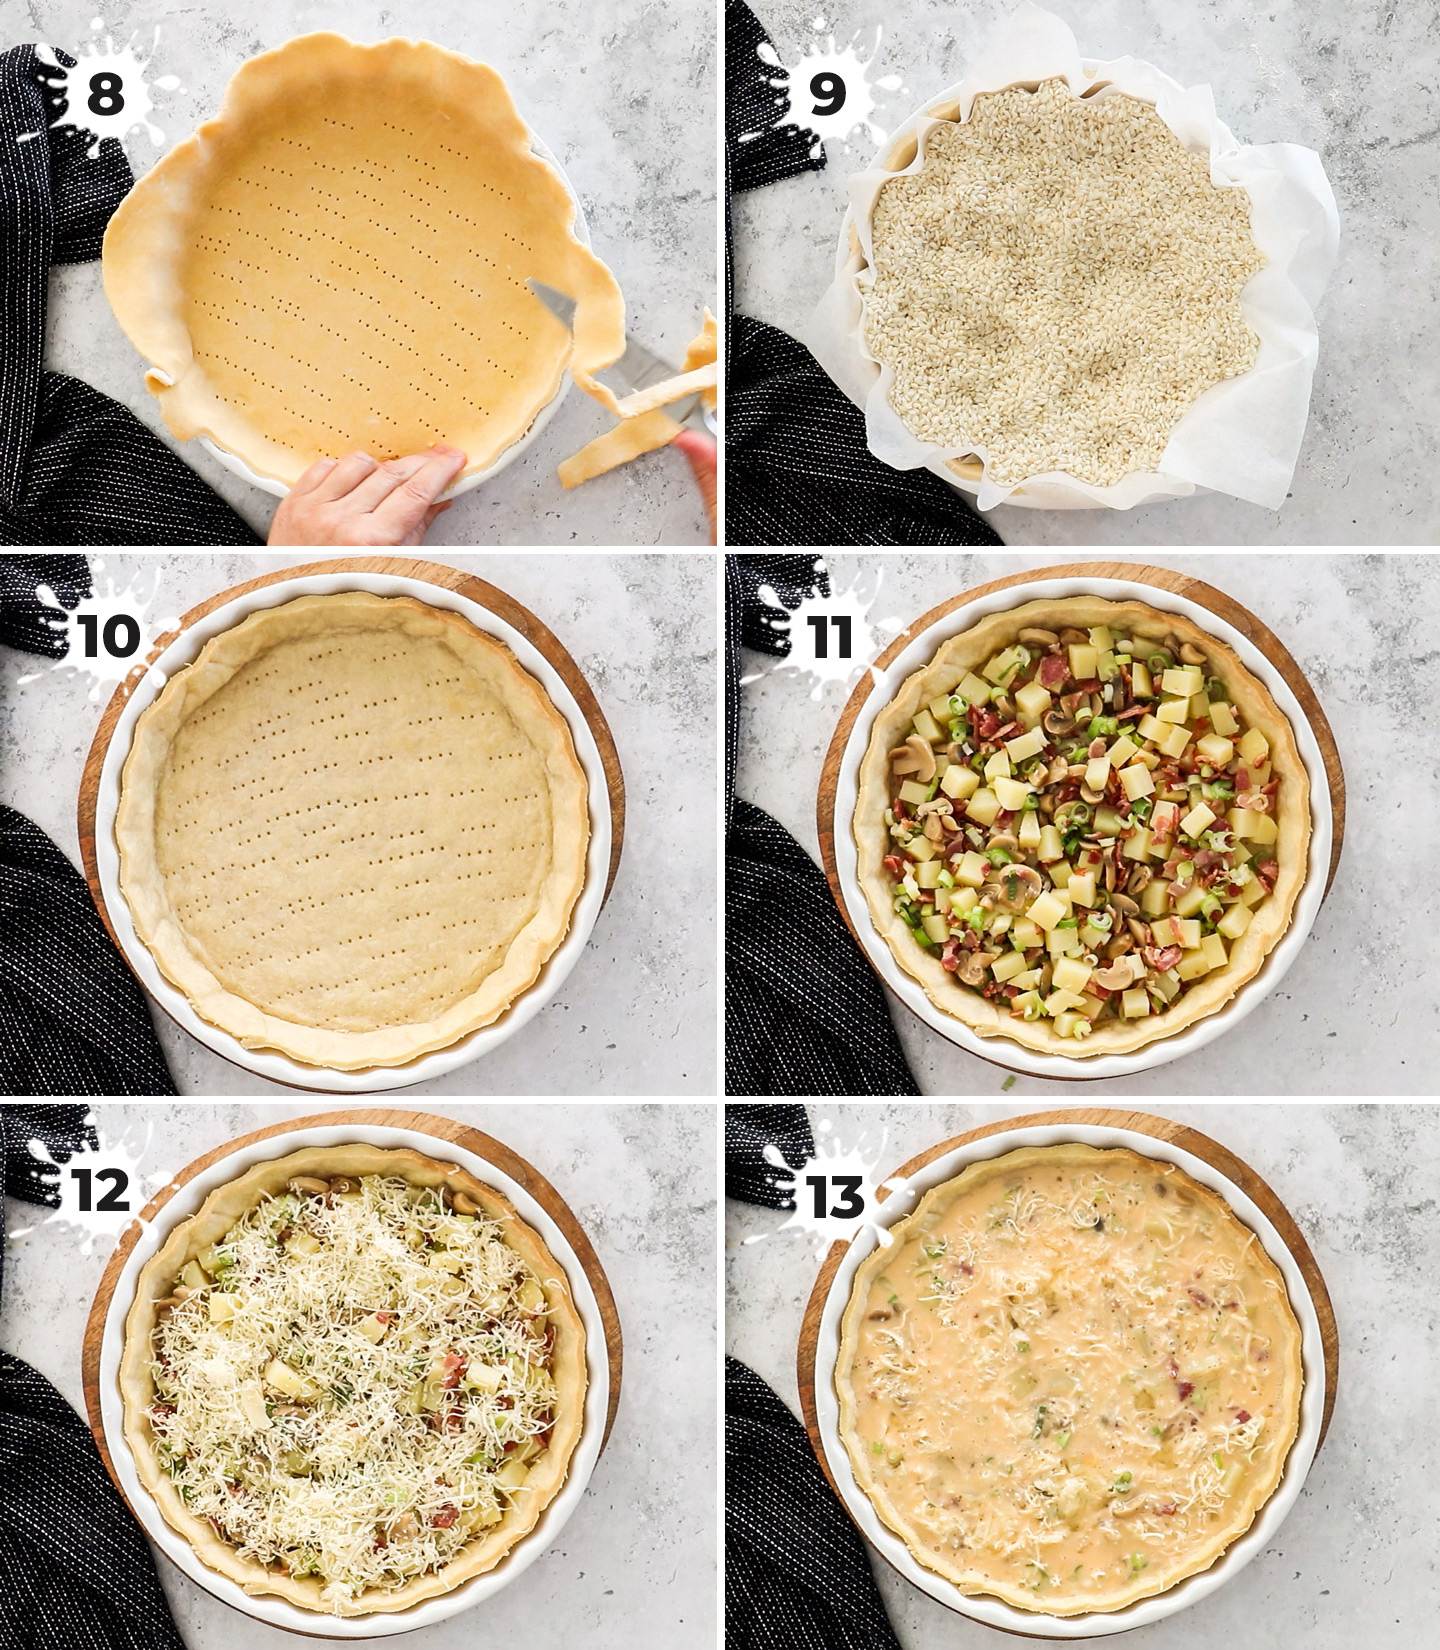 A collage showing how to assemble the quiche.